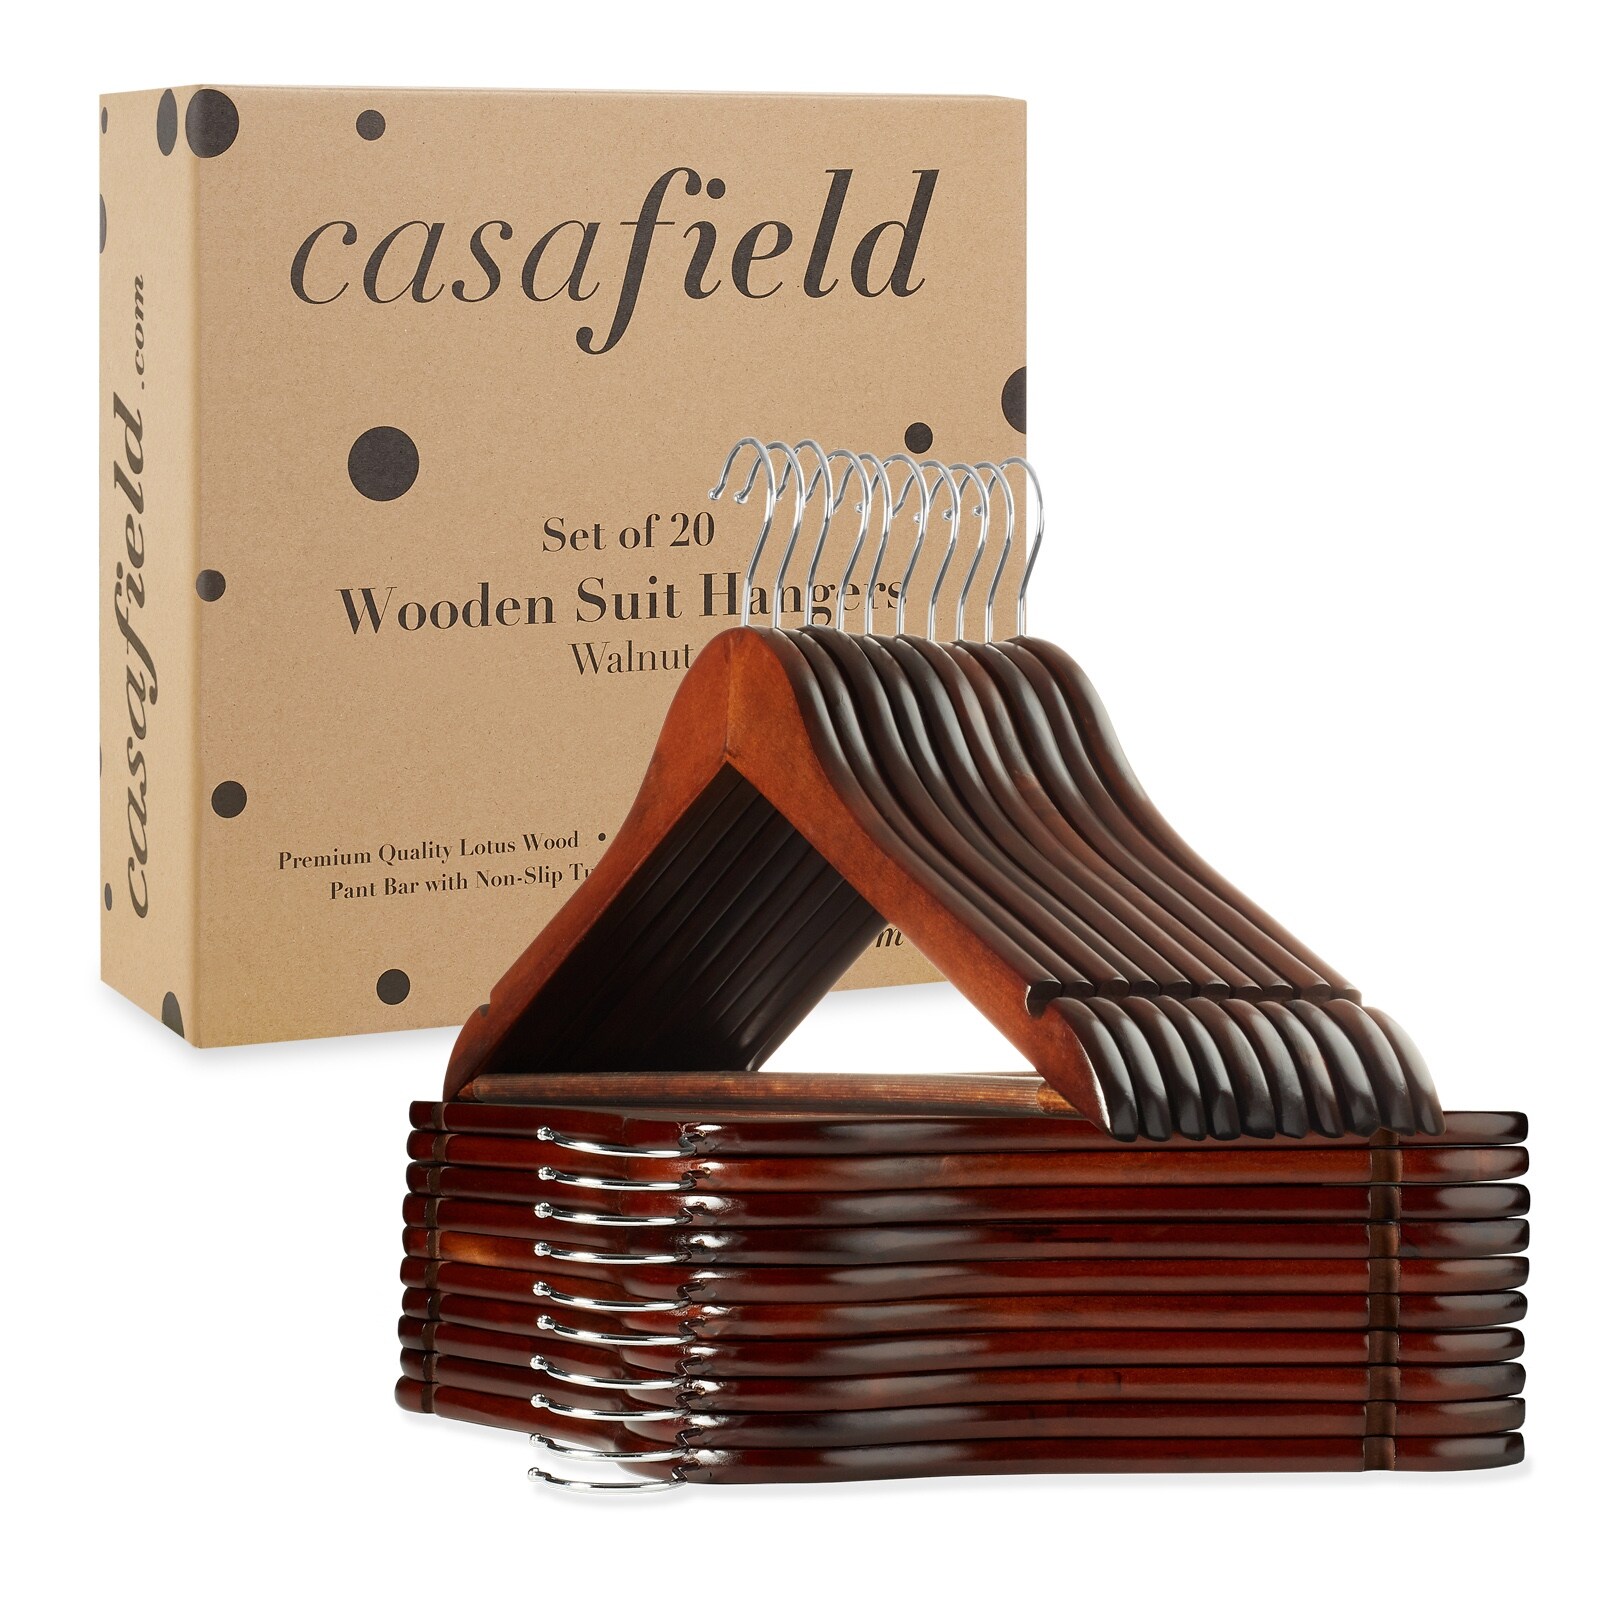 https://ak1.ostkcdn.com/images/products/is/images/direct/aeb3e952bde613d1eb5a359c31655b26663ba651/20-Wooden-Suit-Hangers-by-Casafield.jpg